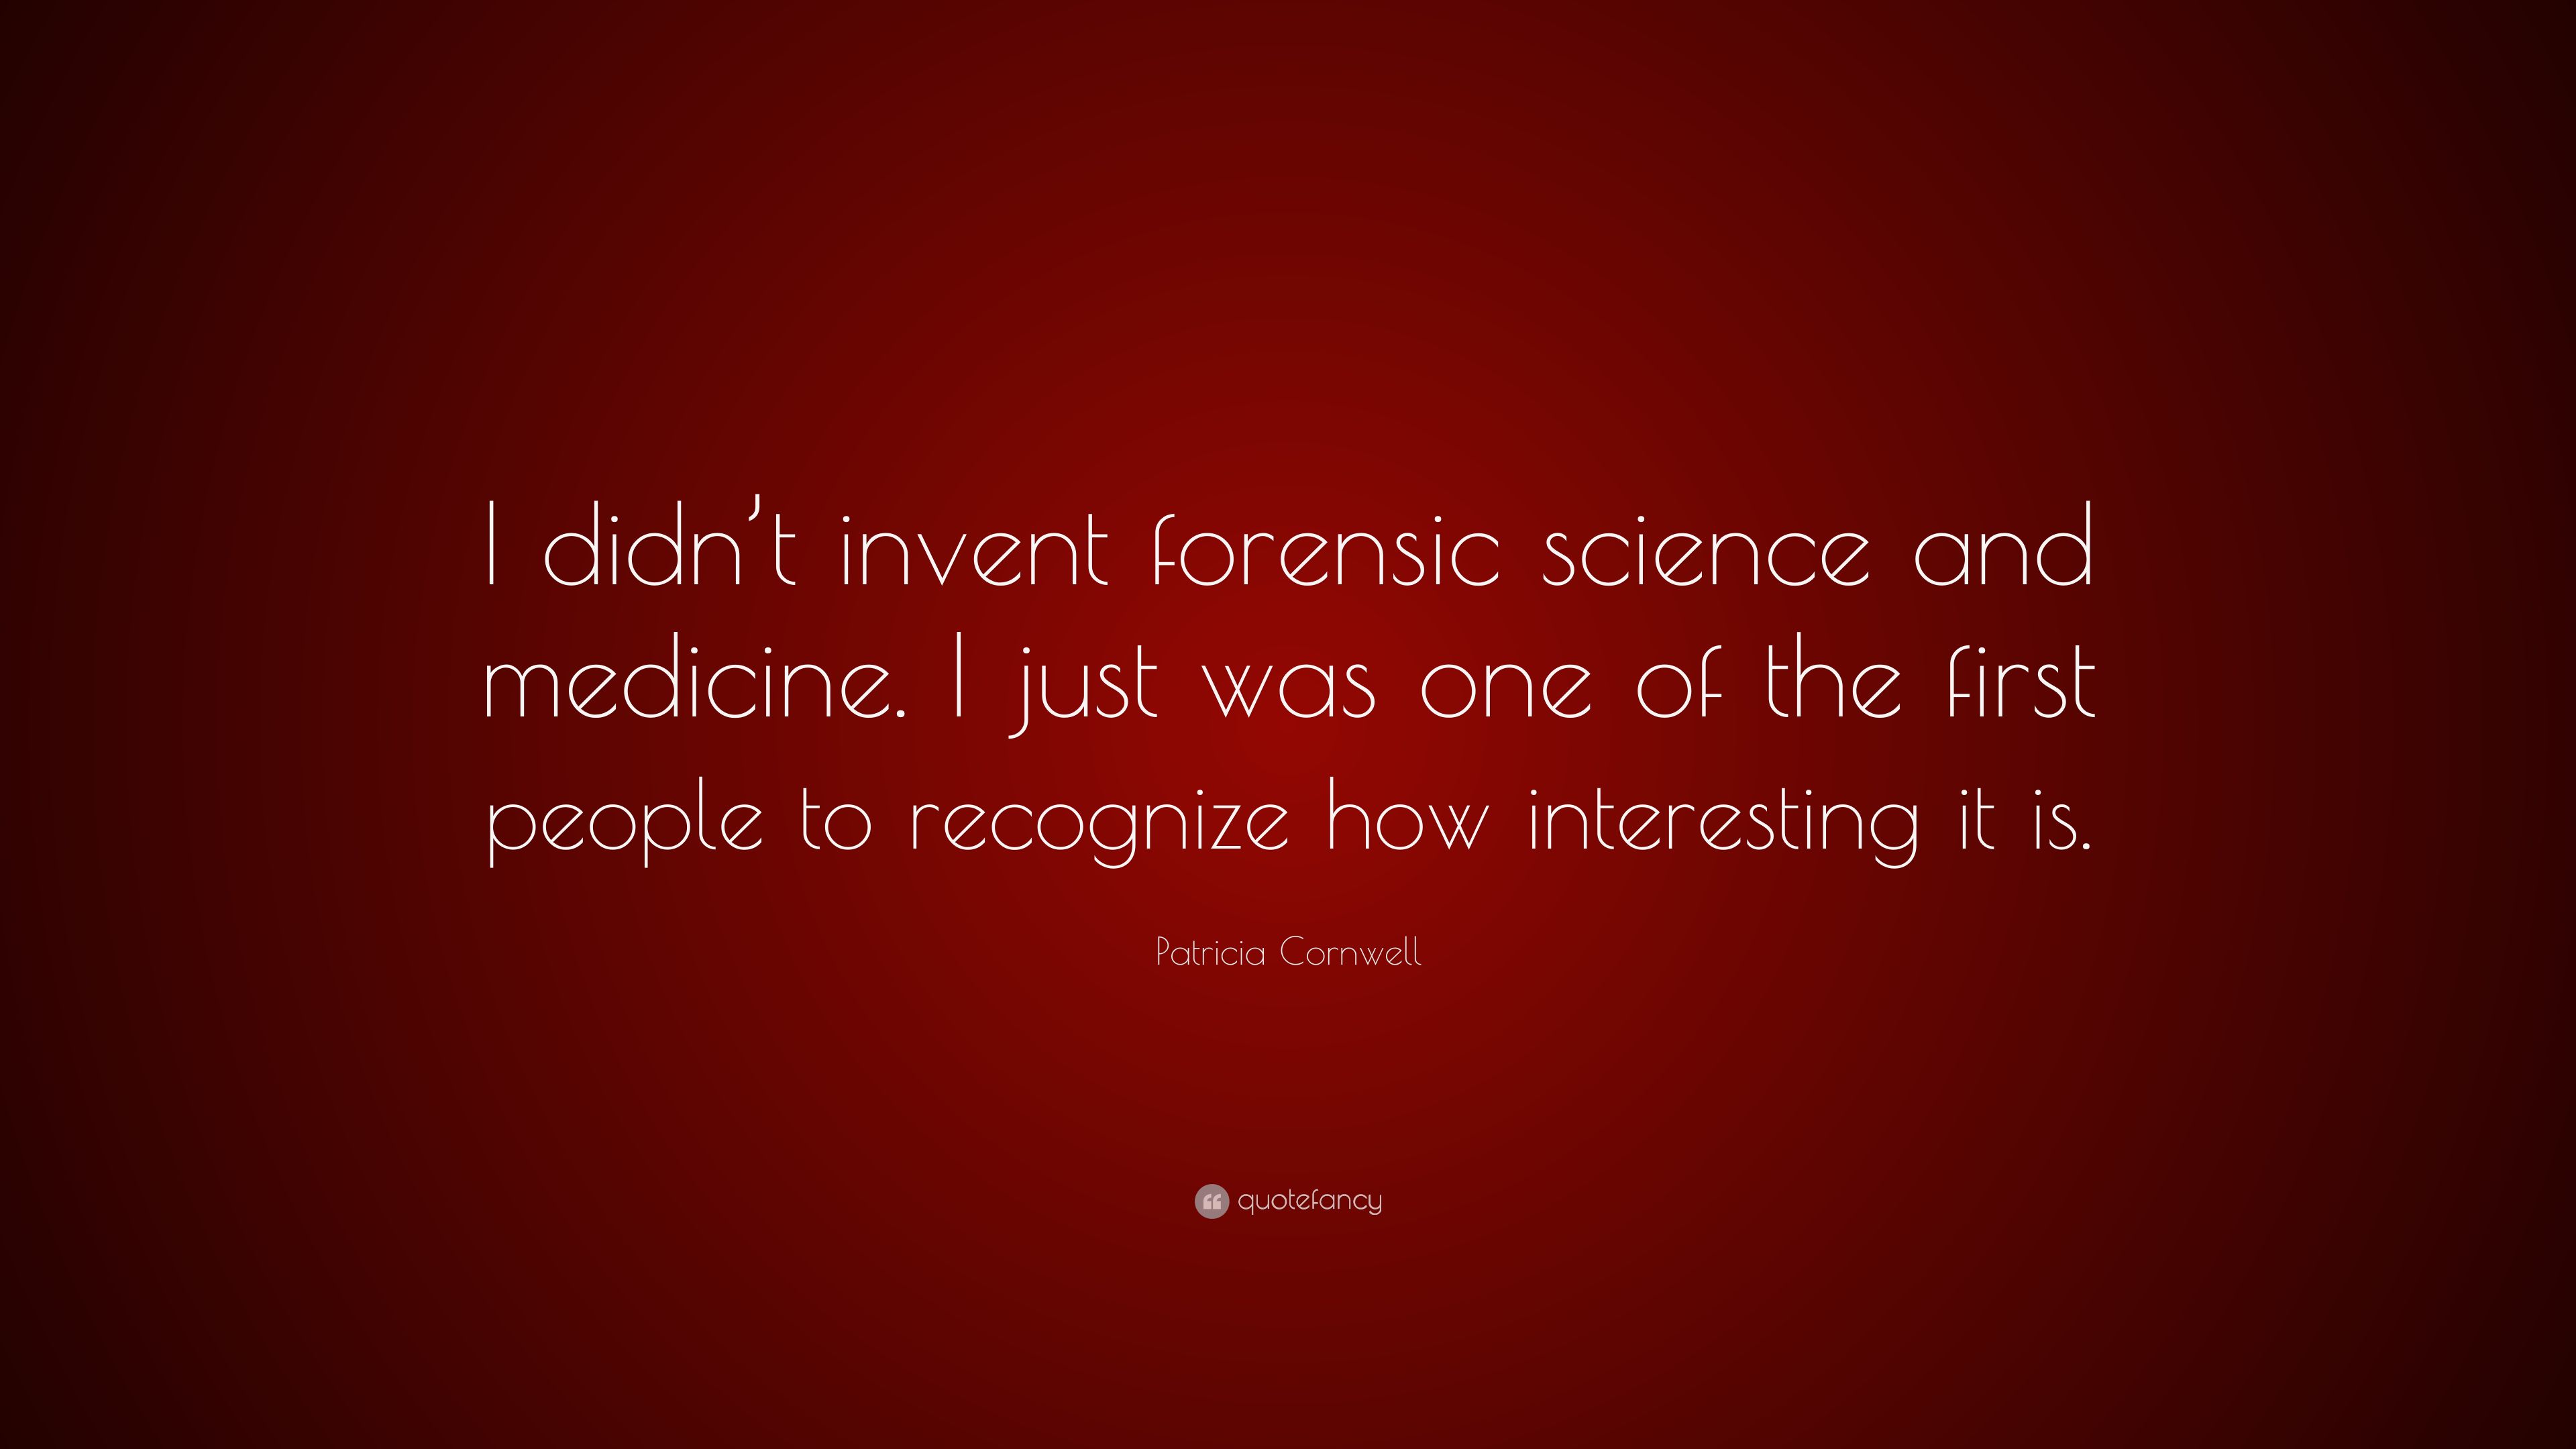 Patricia Cornwell Quote: “I didn't invent forensic science and medicine. I just was one of the first people to recognize how interesting it is.” (7 wallpaper)